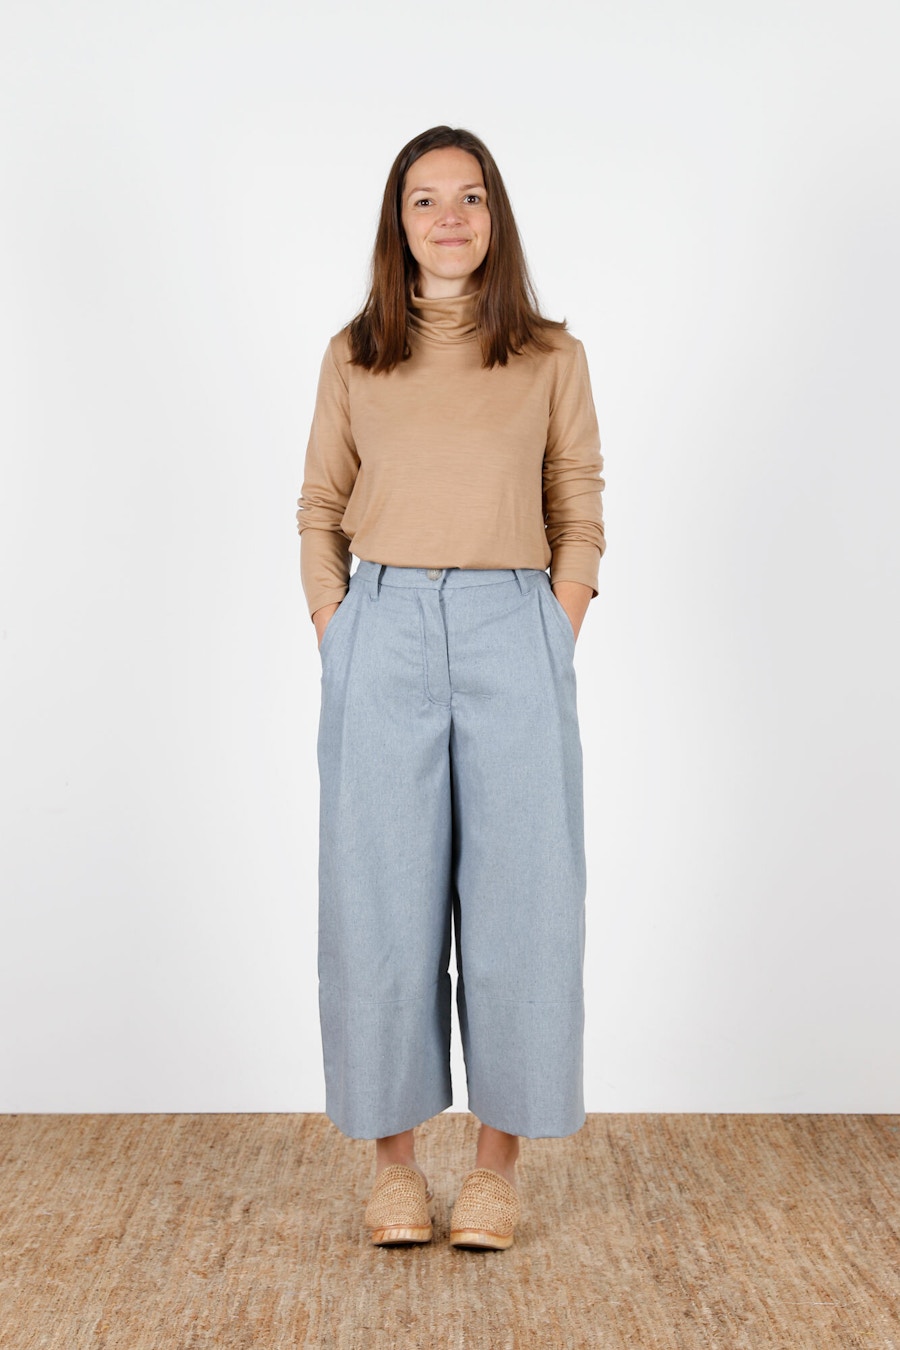 Front Biscotti Fog Upcycled Cotton Twill Birgitta Helmersson Block Pants The Fabric Store Blog